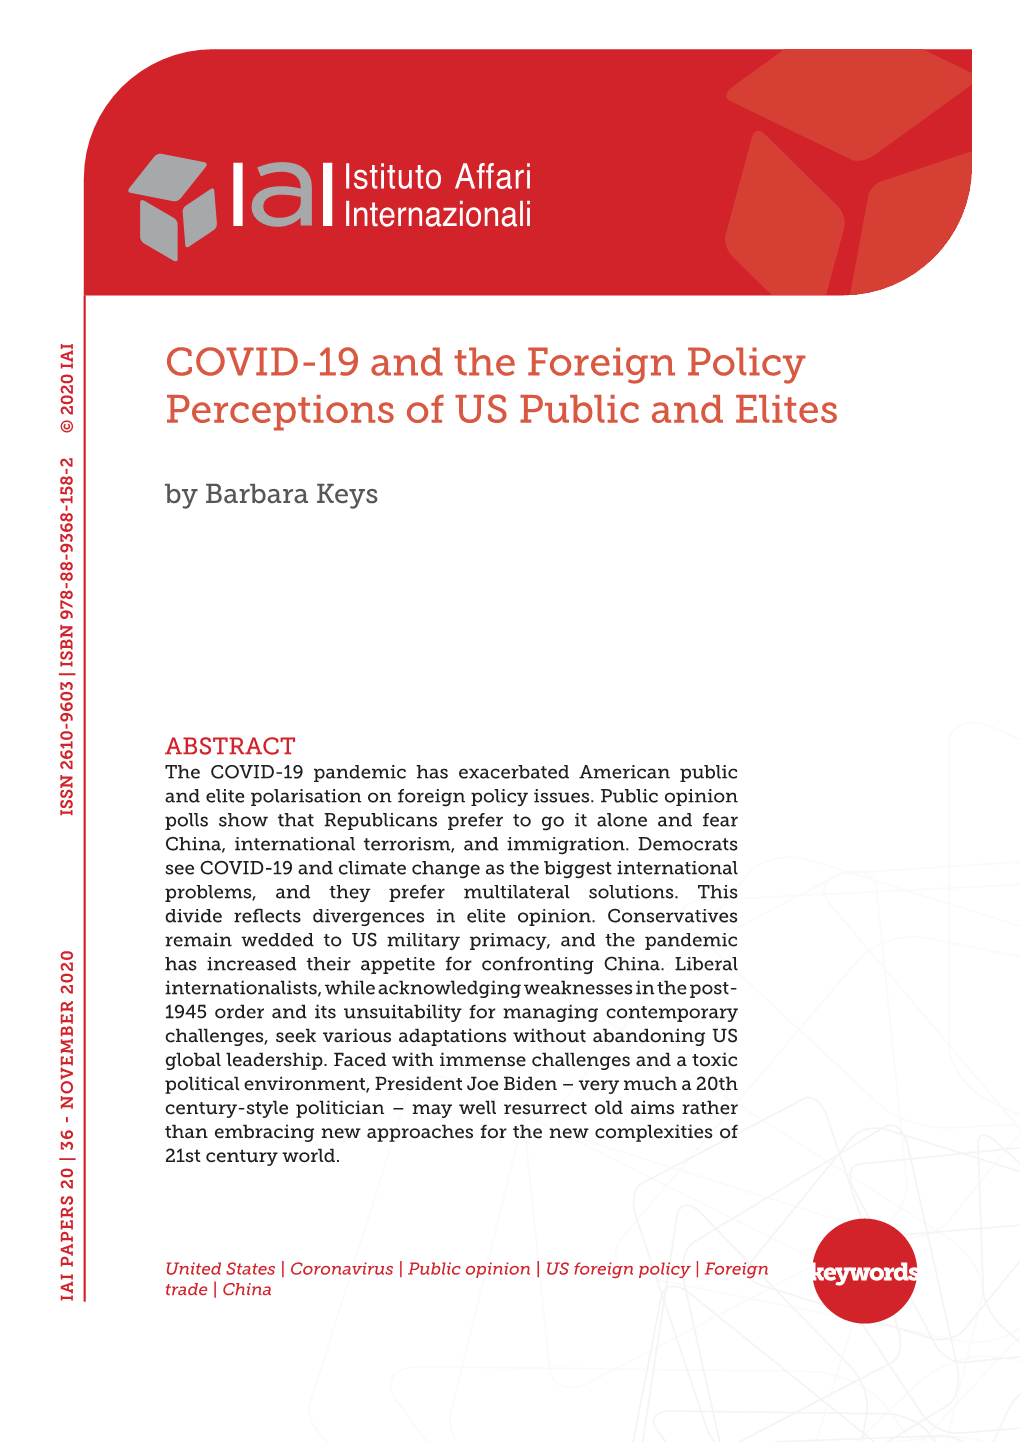 COVID-19 and the Foreign Policy Perceptions of US Public and Elites